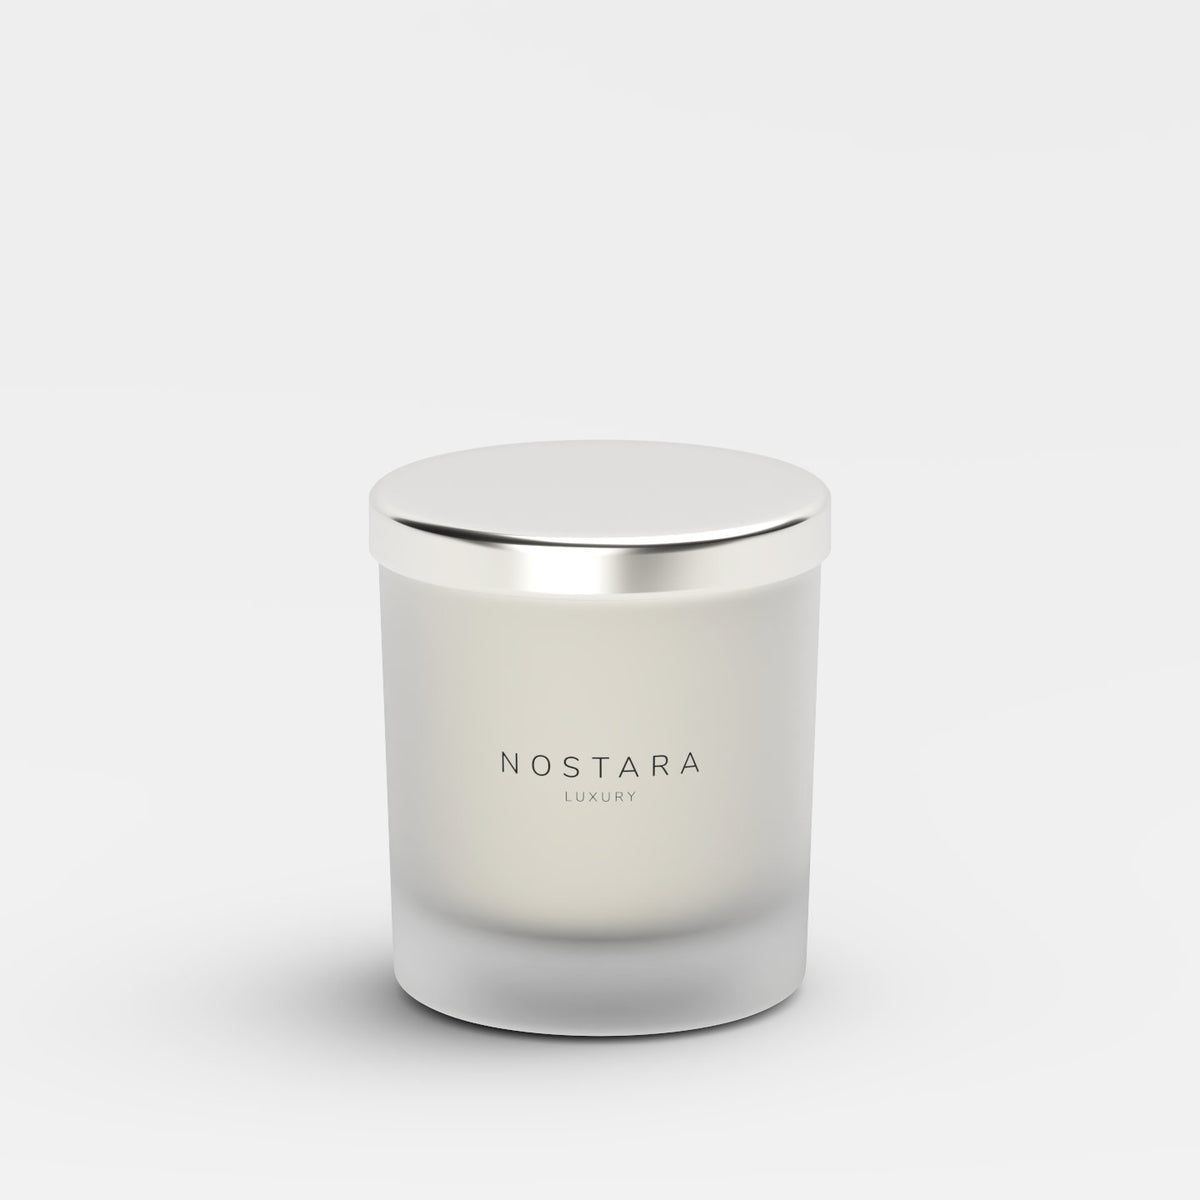 Nostara Frosted Fir Scented Candle with Lid Image